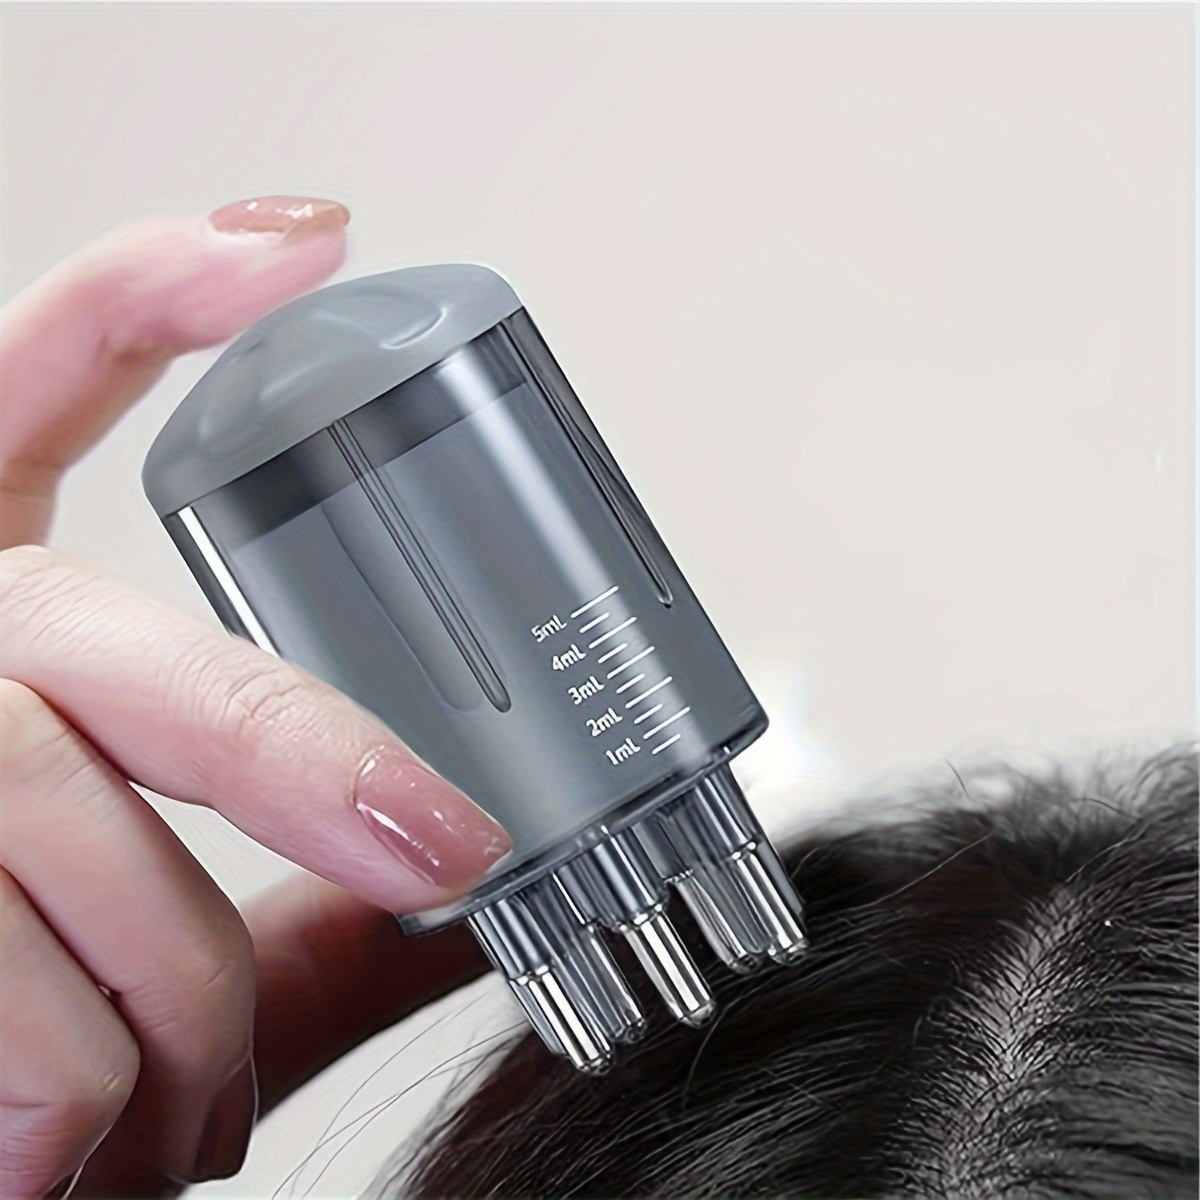 Hair Oil Applicator Bottle With Comb For Hair Growth Treatment, With Hair  Oil Bottle And Hairdressing Bottle In Pair, For Home & Salon Use